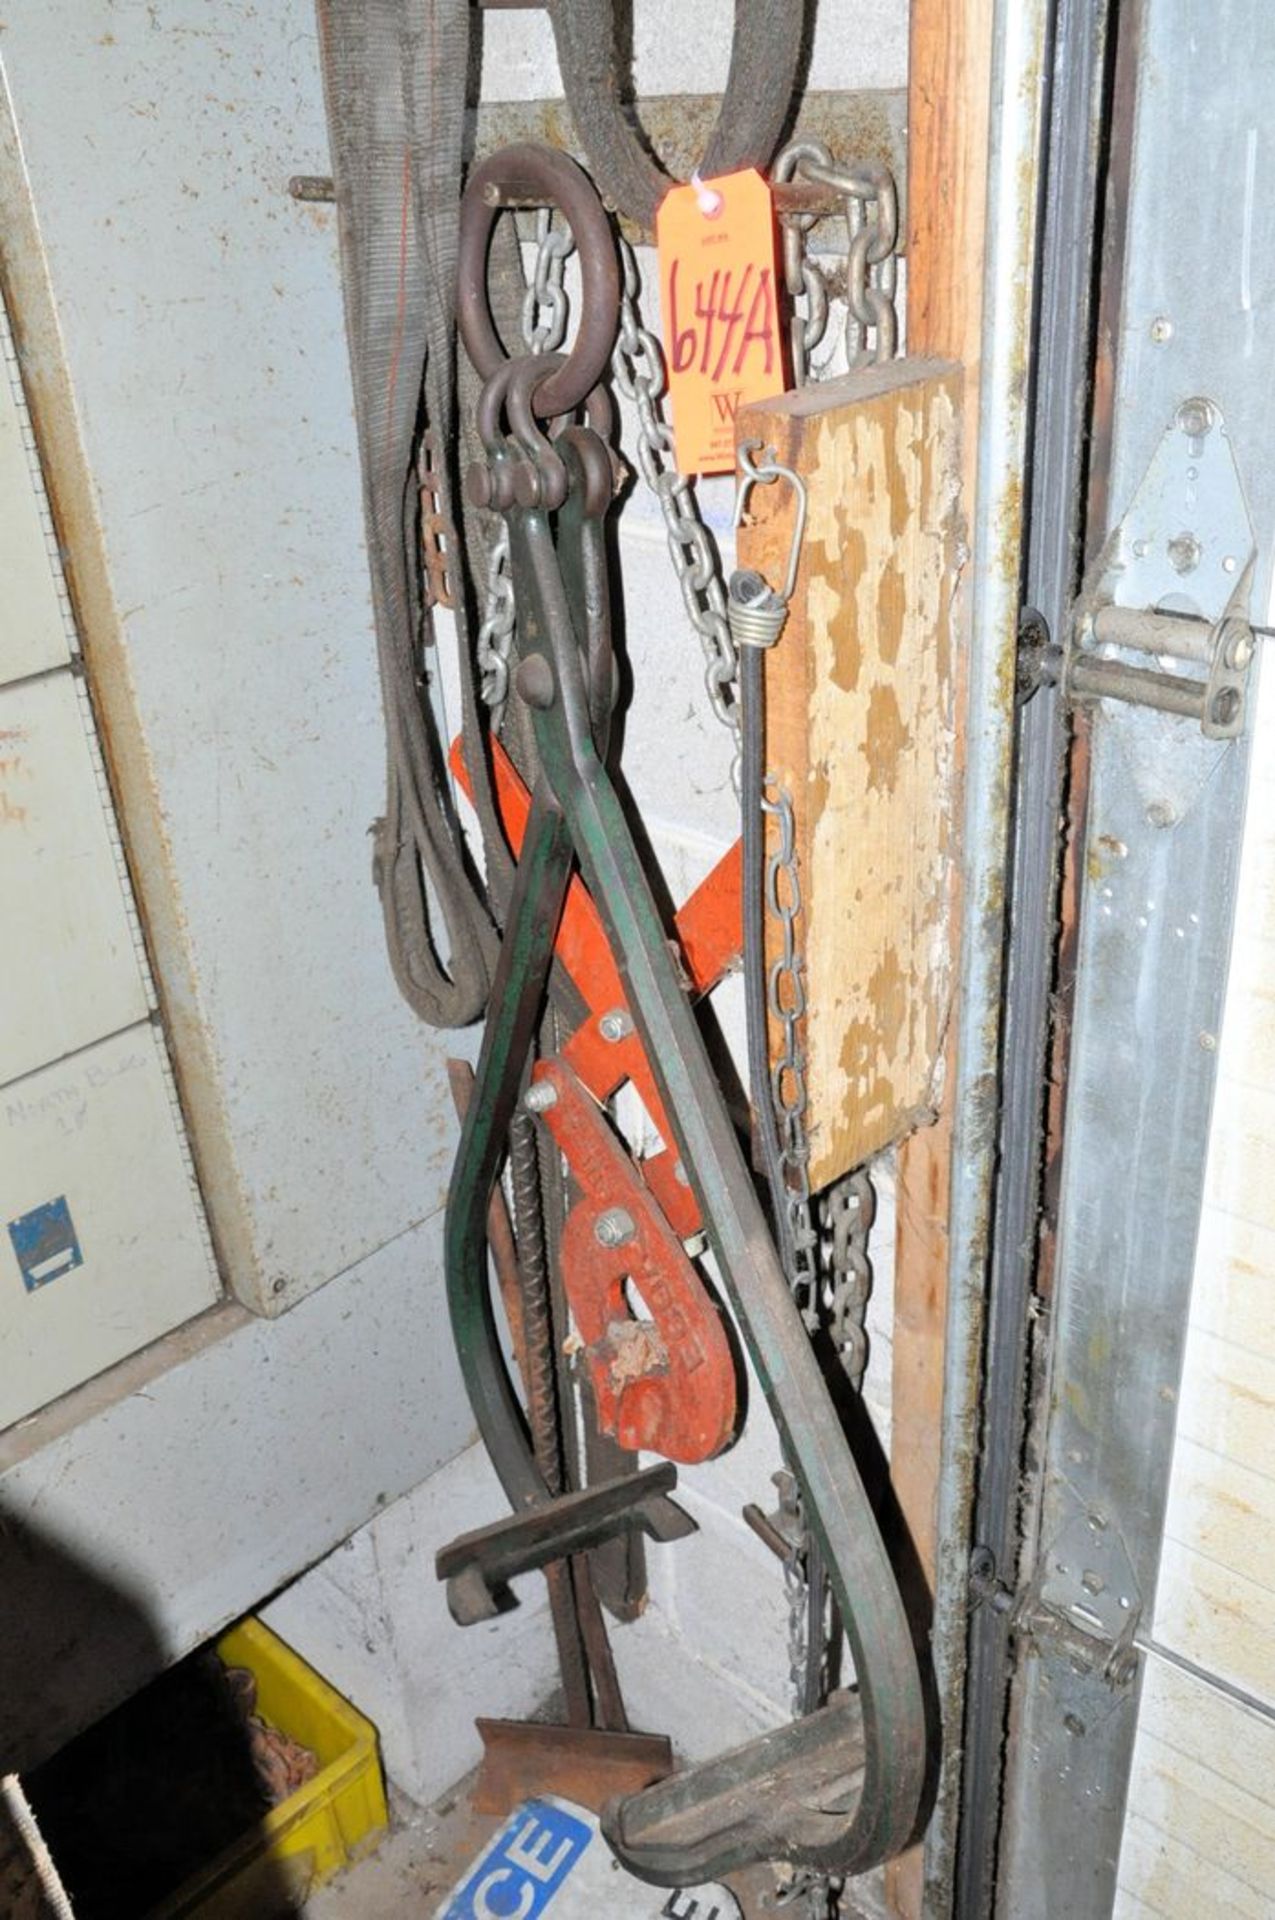 Lot - (4) Strap Slings, (1) Mesh Sling, (2) Material Grabs and (1) Pallet Grab on Wall with Chain - Image 3 of 5